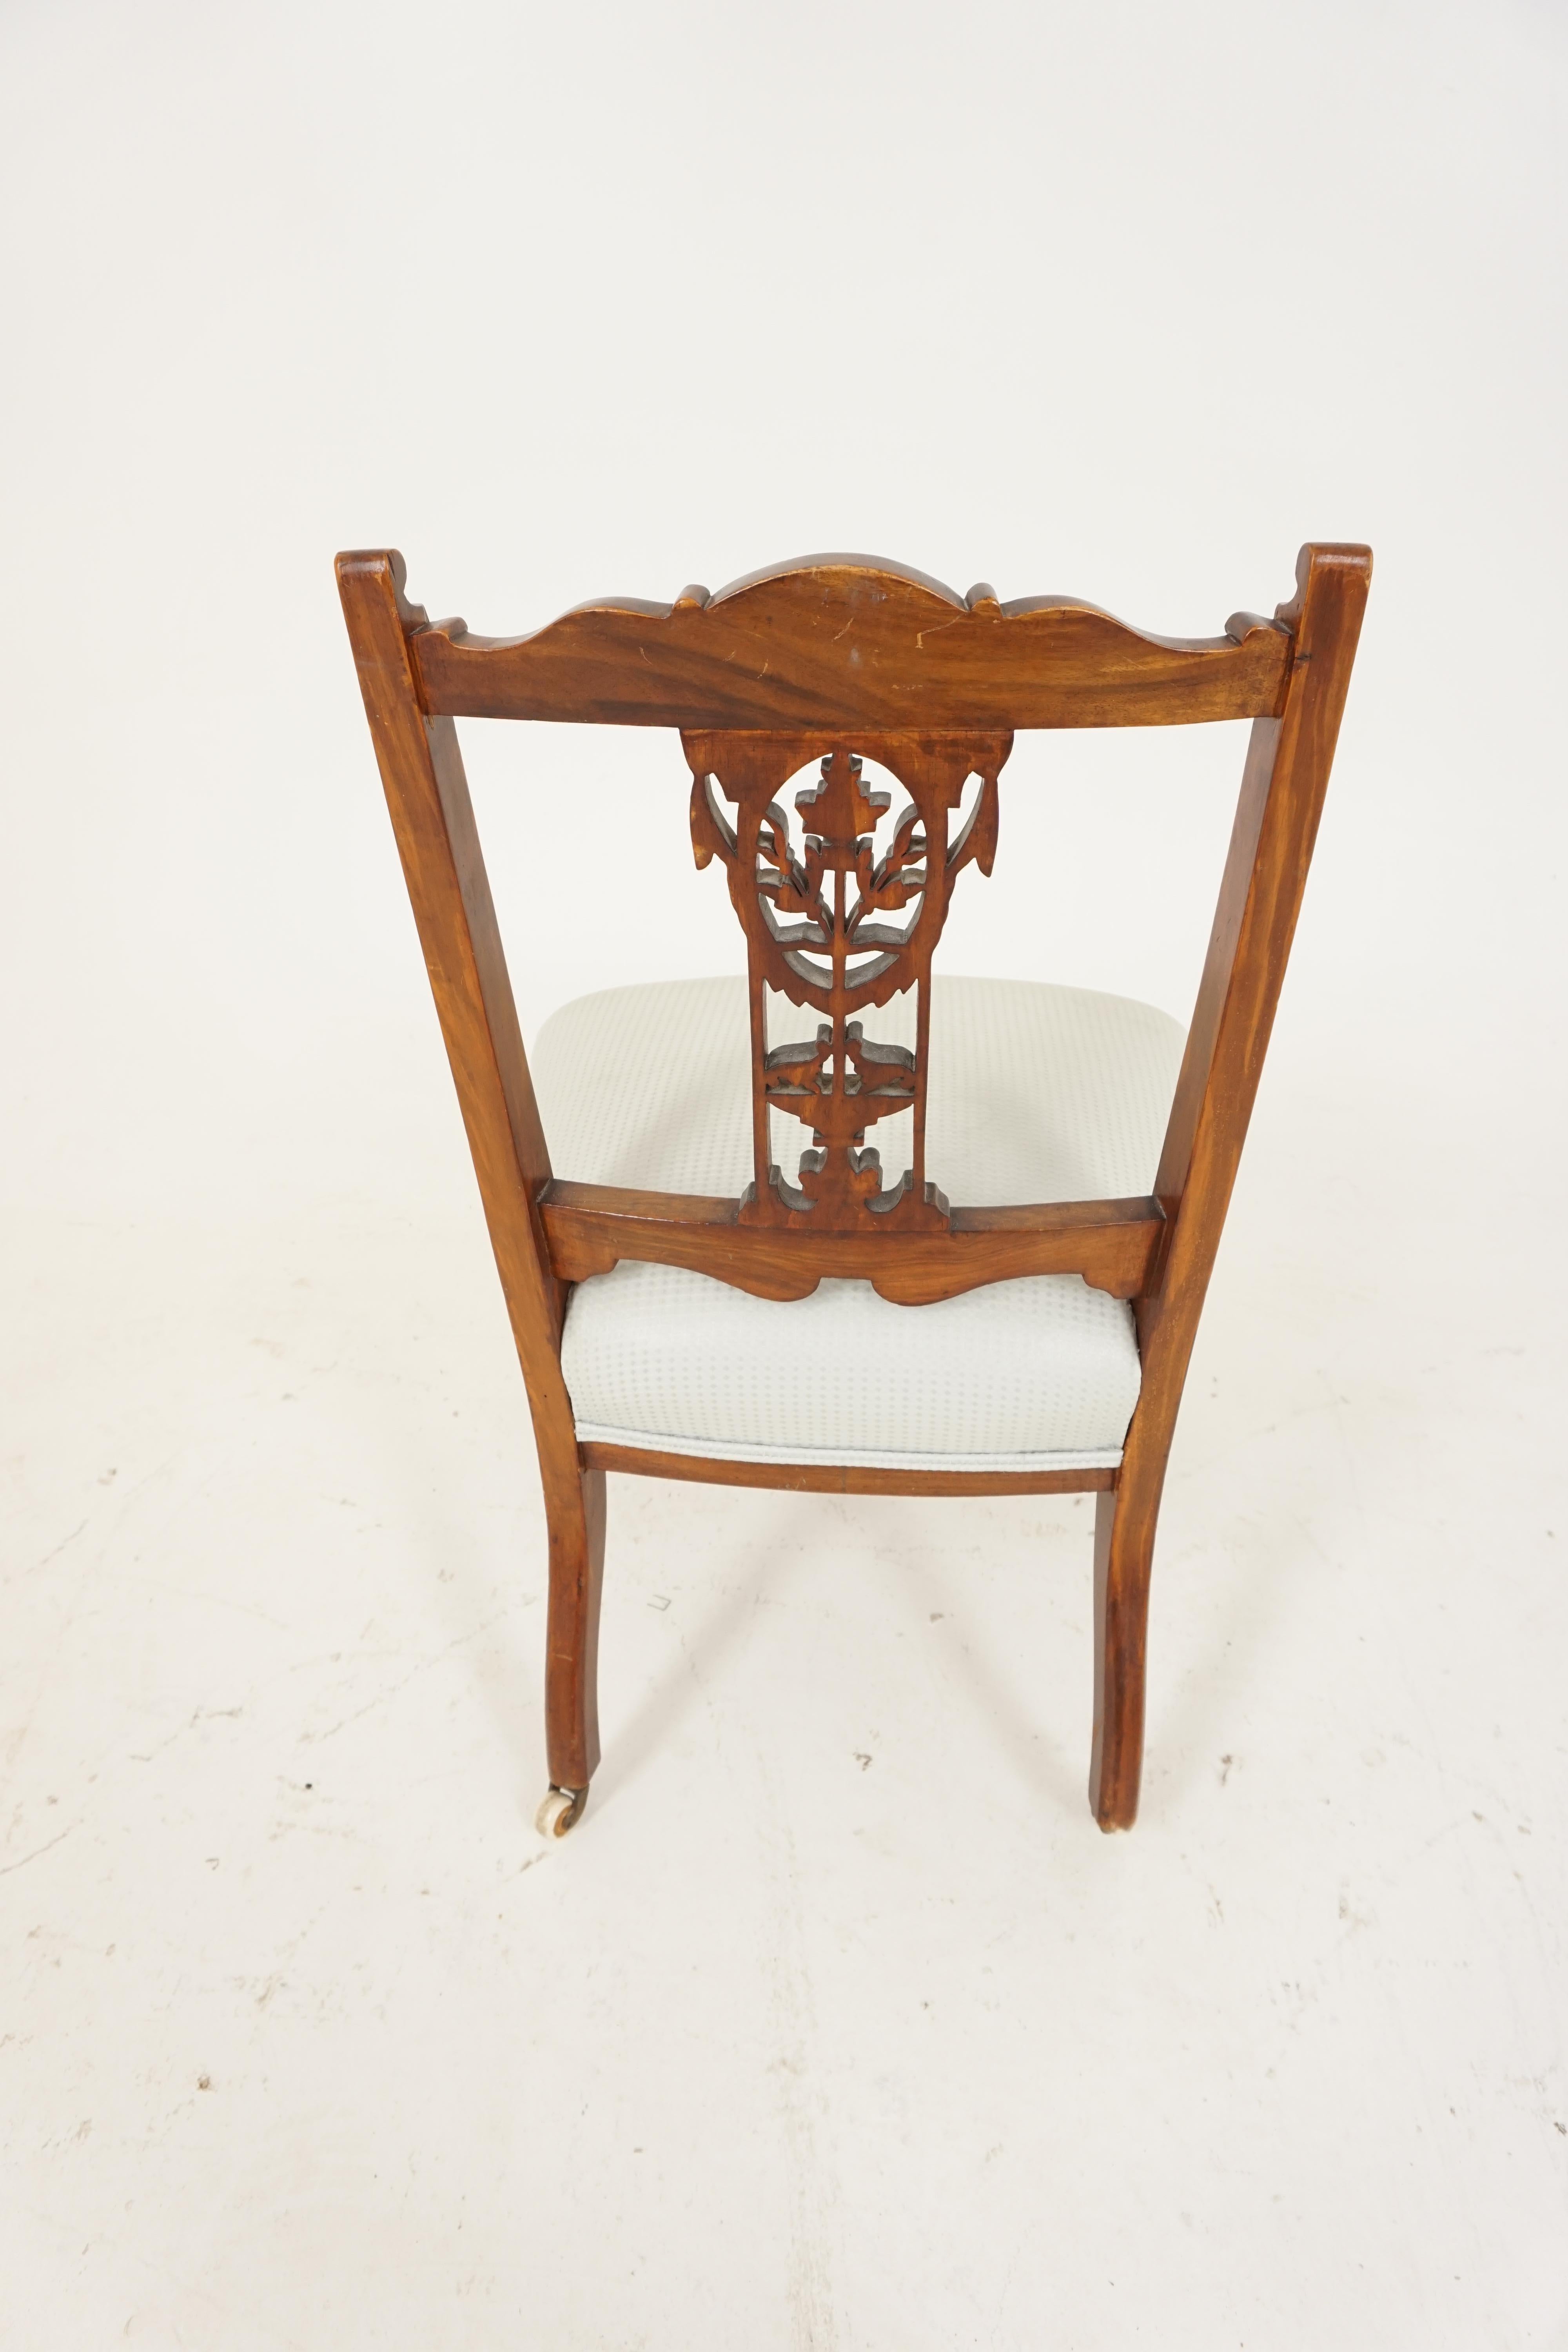 Hand-Crafted Antique Victorian, Carved Walnut Nursing and Praying Chair, Scotland 1890, B2078